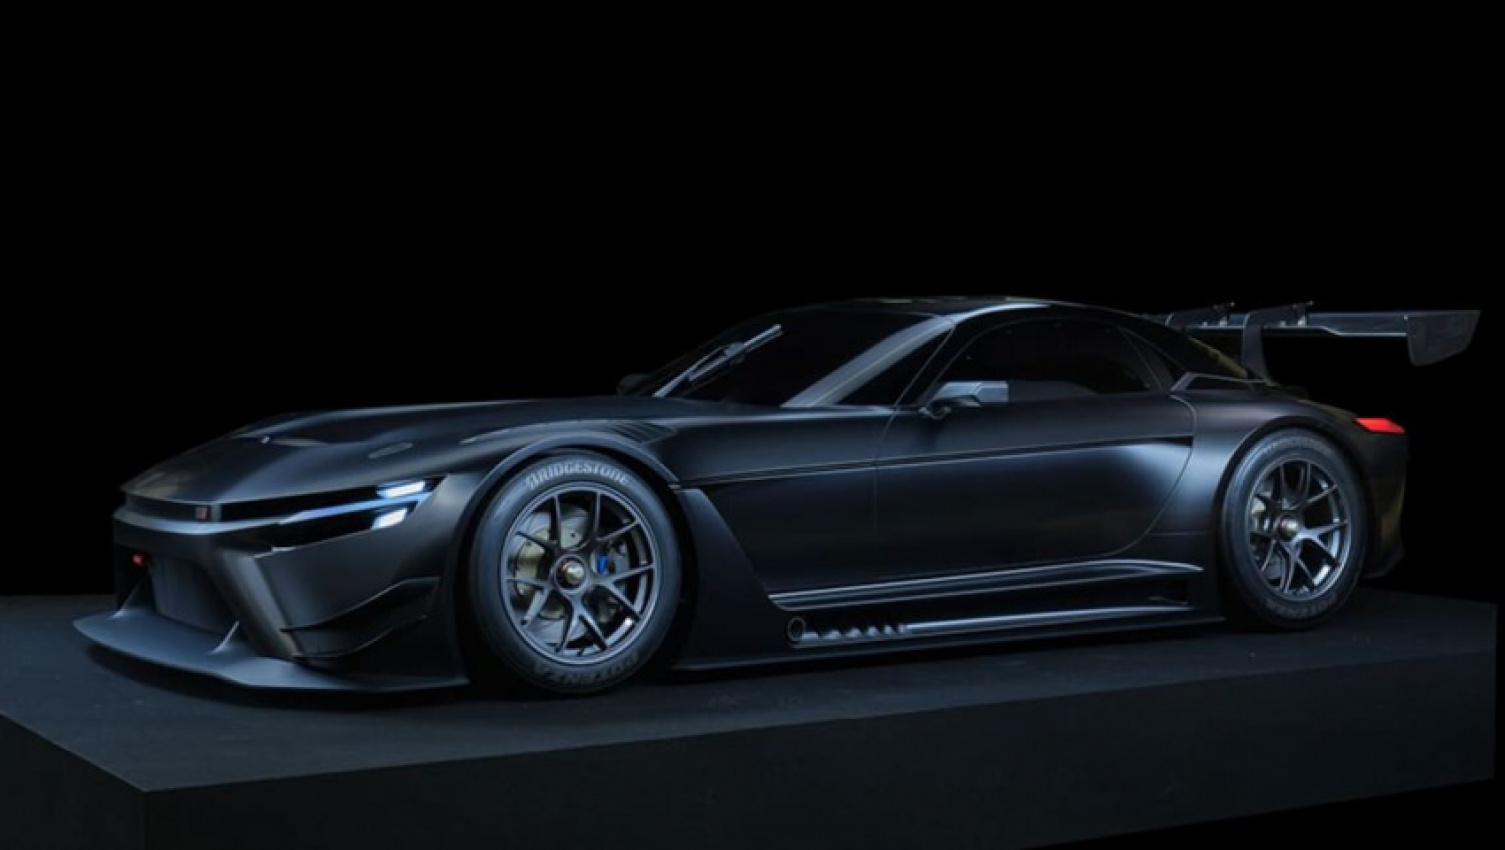 autos, bmw, cars, mercedes-benz, mg, porsche, toyota, concept cars, industry news, mercedes, motor shows, motorsports, showroom news, sports cars, toyota coupe range, toyota news, another new toyota sports car coming soon? 2022 toyota gr gt3 concept shaping up as future porsche 911, bmw m8 and mercedes-amg gt rival disguised as race car